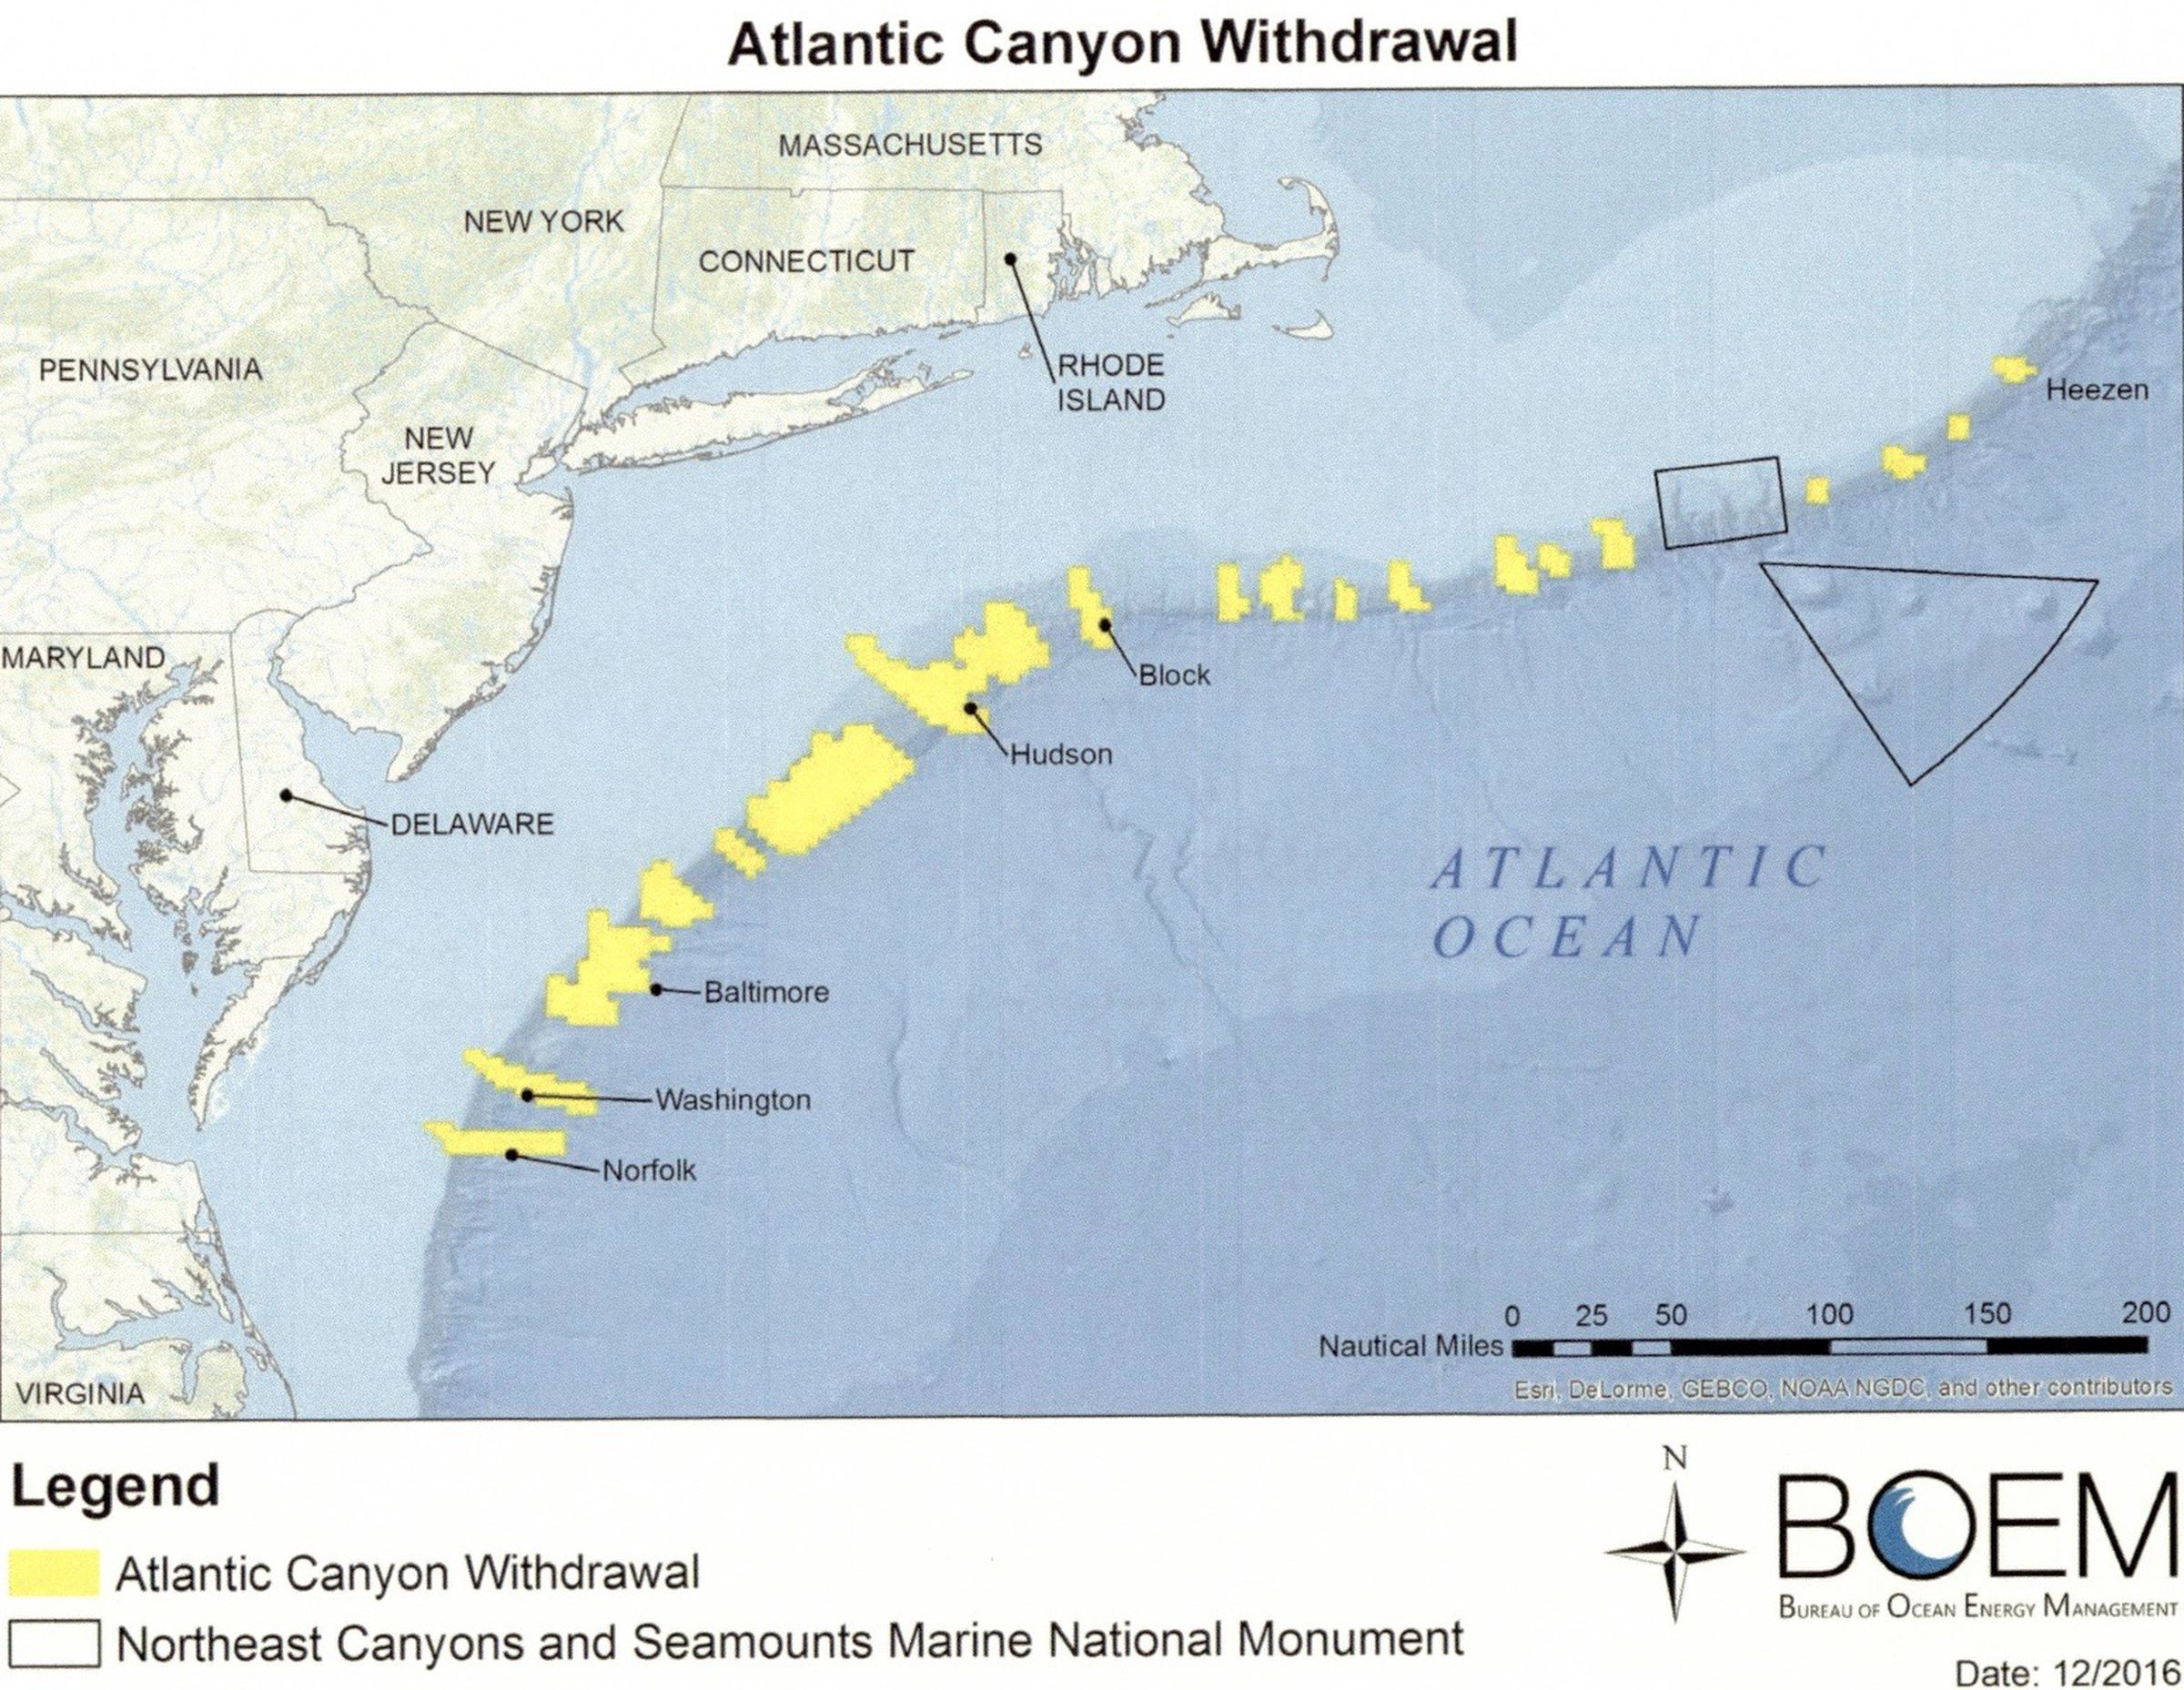 The yellow areas are the ones that President Obama protected under the 1953 Outer Continental Shelf Lands Act